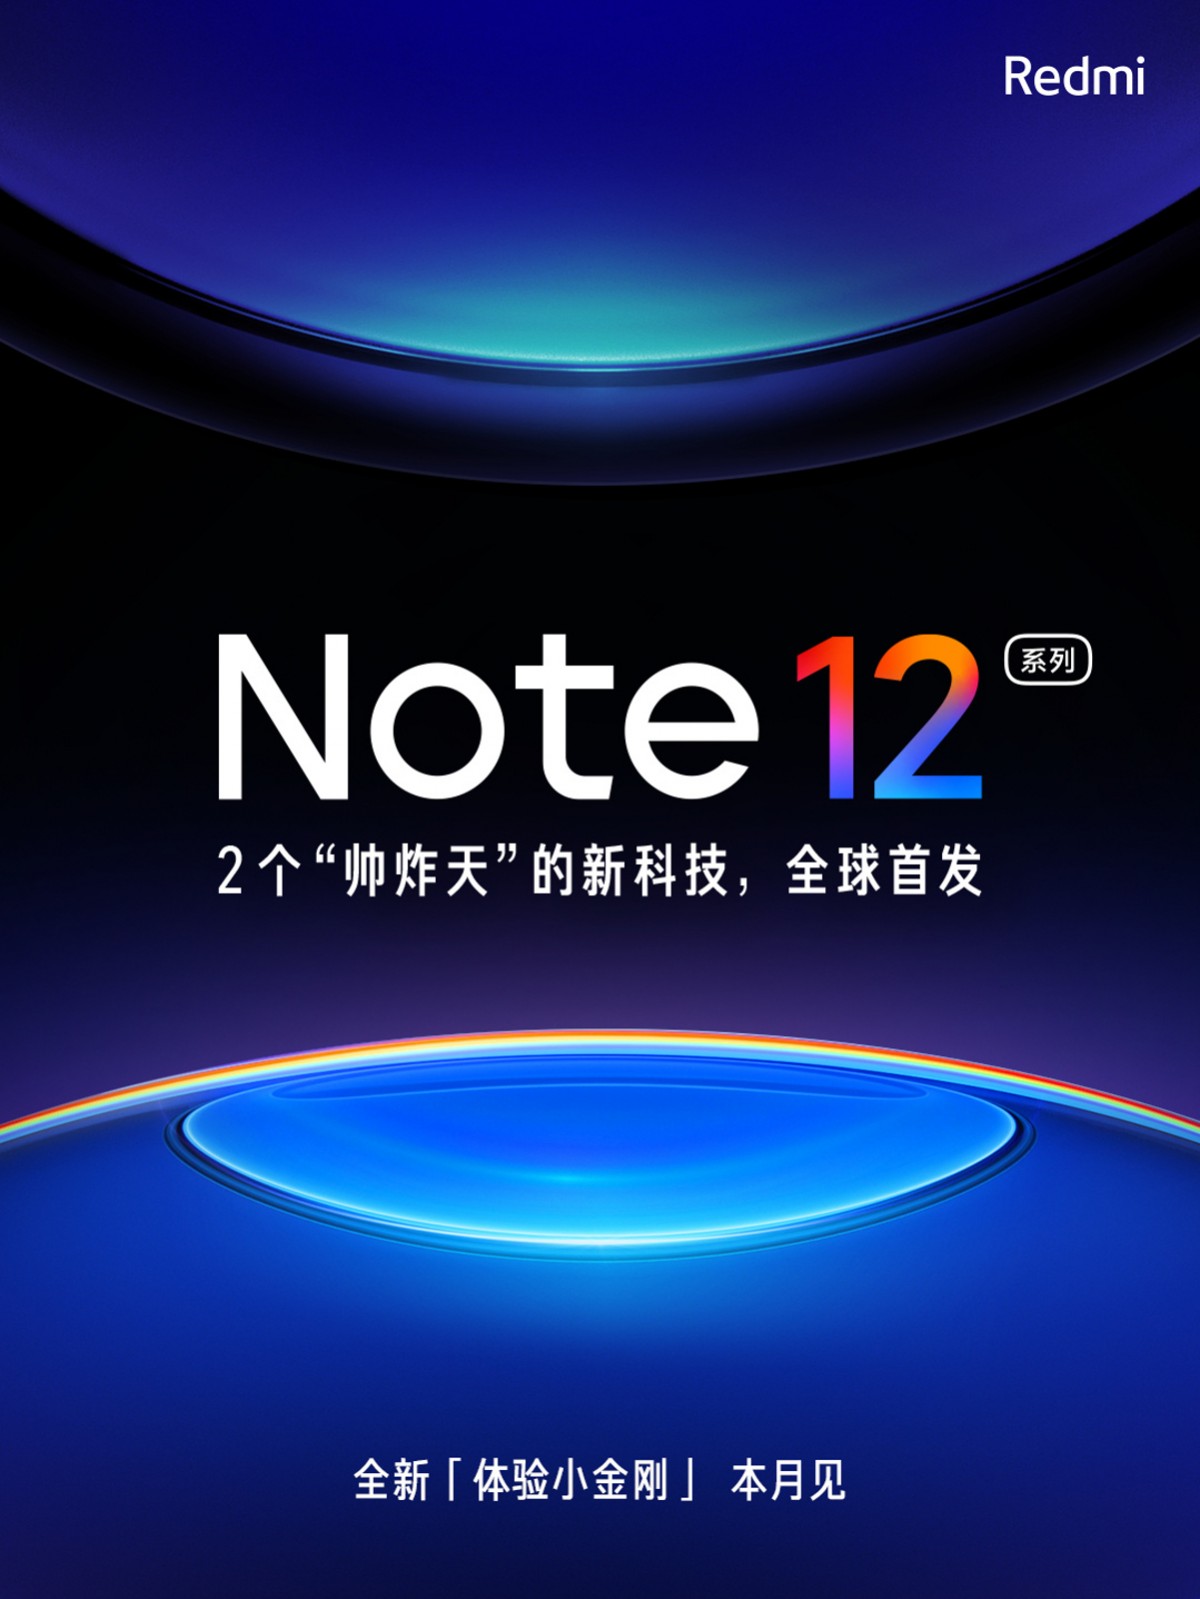 Xiaomi is launching Redmi Note 12 series this month